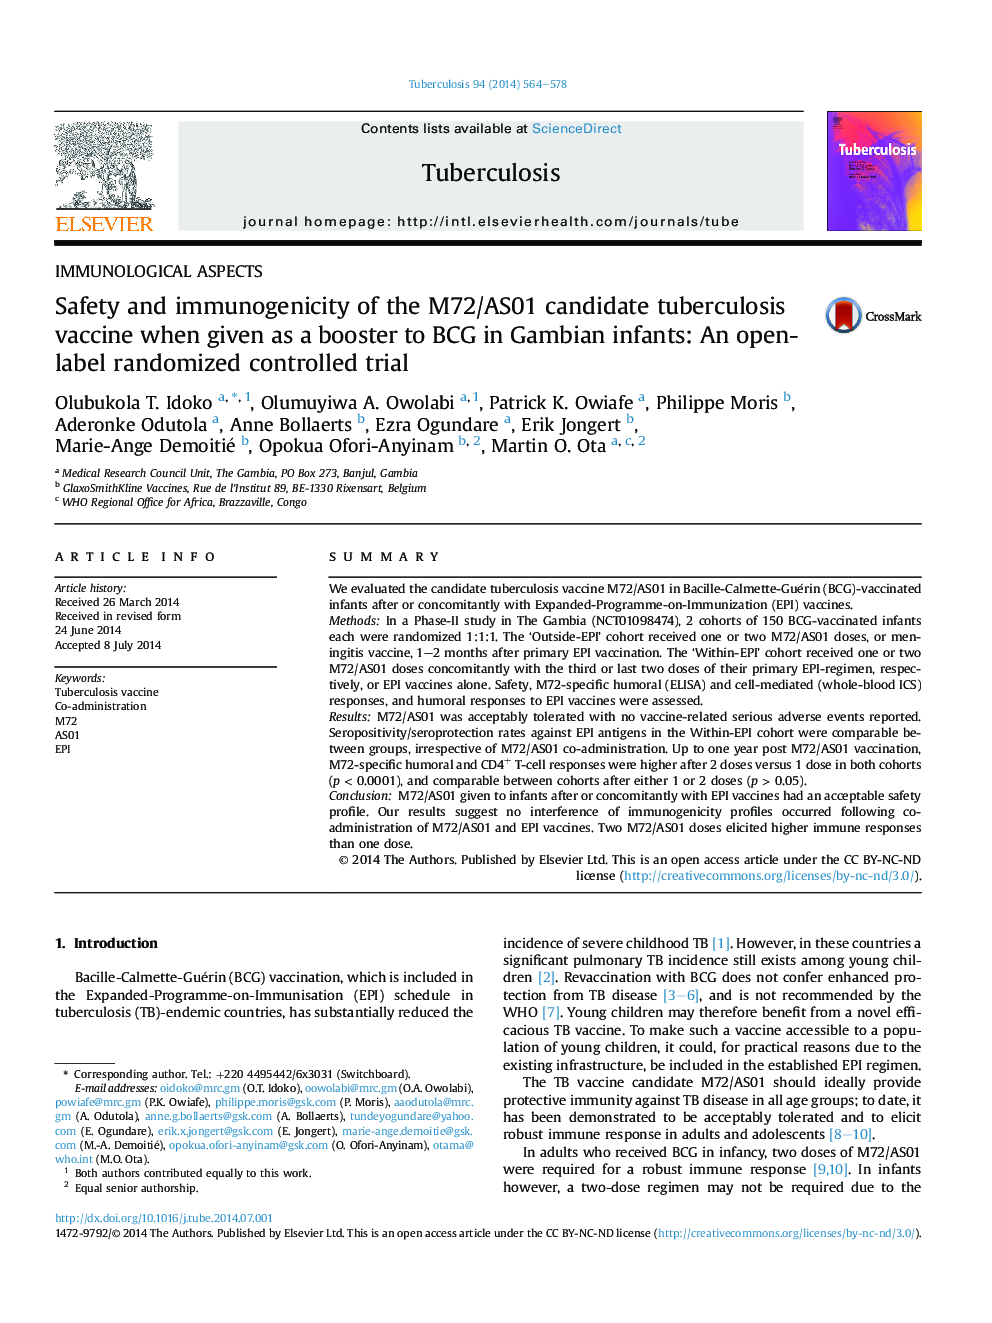 Safety and immunogenicity of the M72/AS01 candidate tuberculosis vaccine when given as a booster to BCG in Gambian infants: An open-label randomized controlled trial